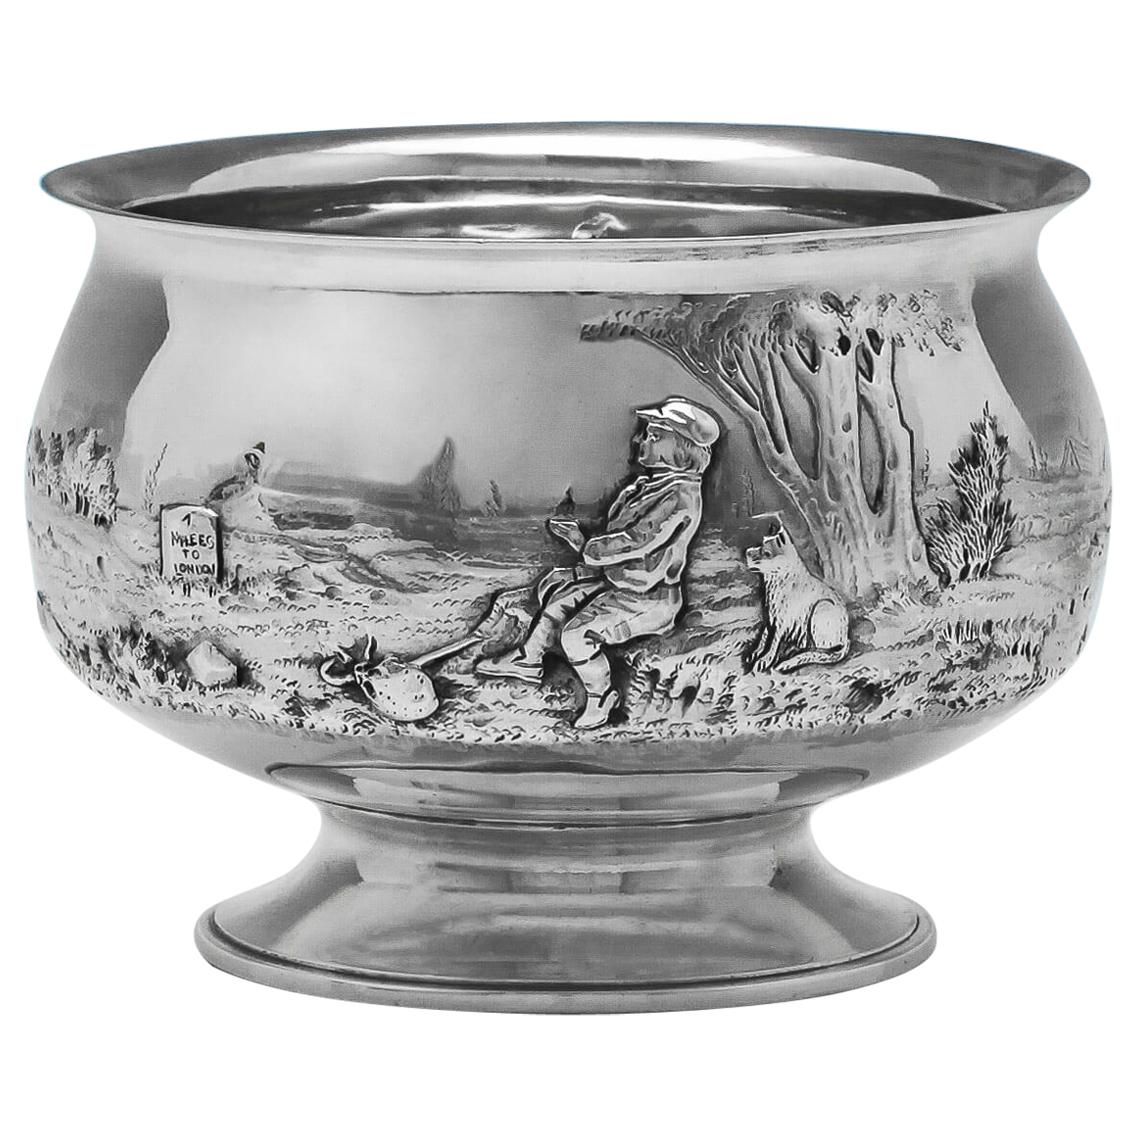 'Dick Whittington & His Cat' Novelty Antique Sterling Silver Bowl from 1908